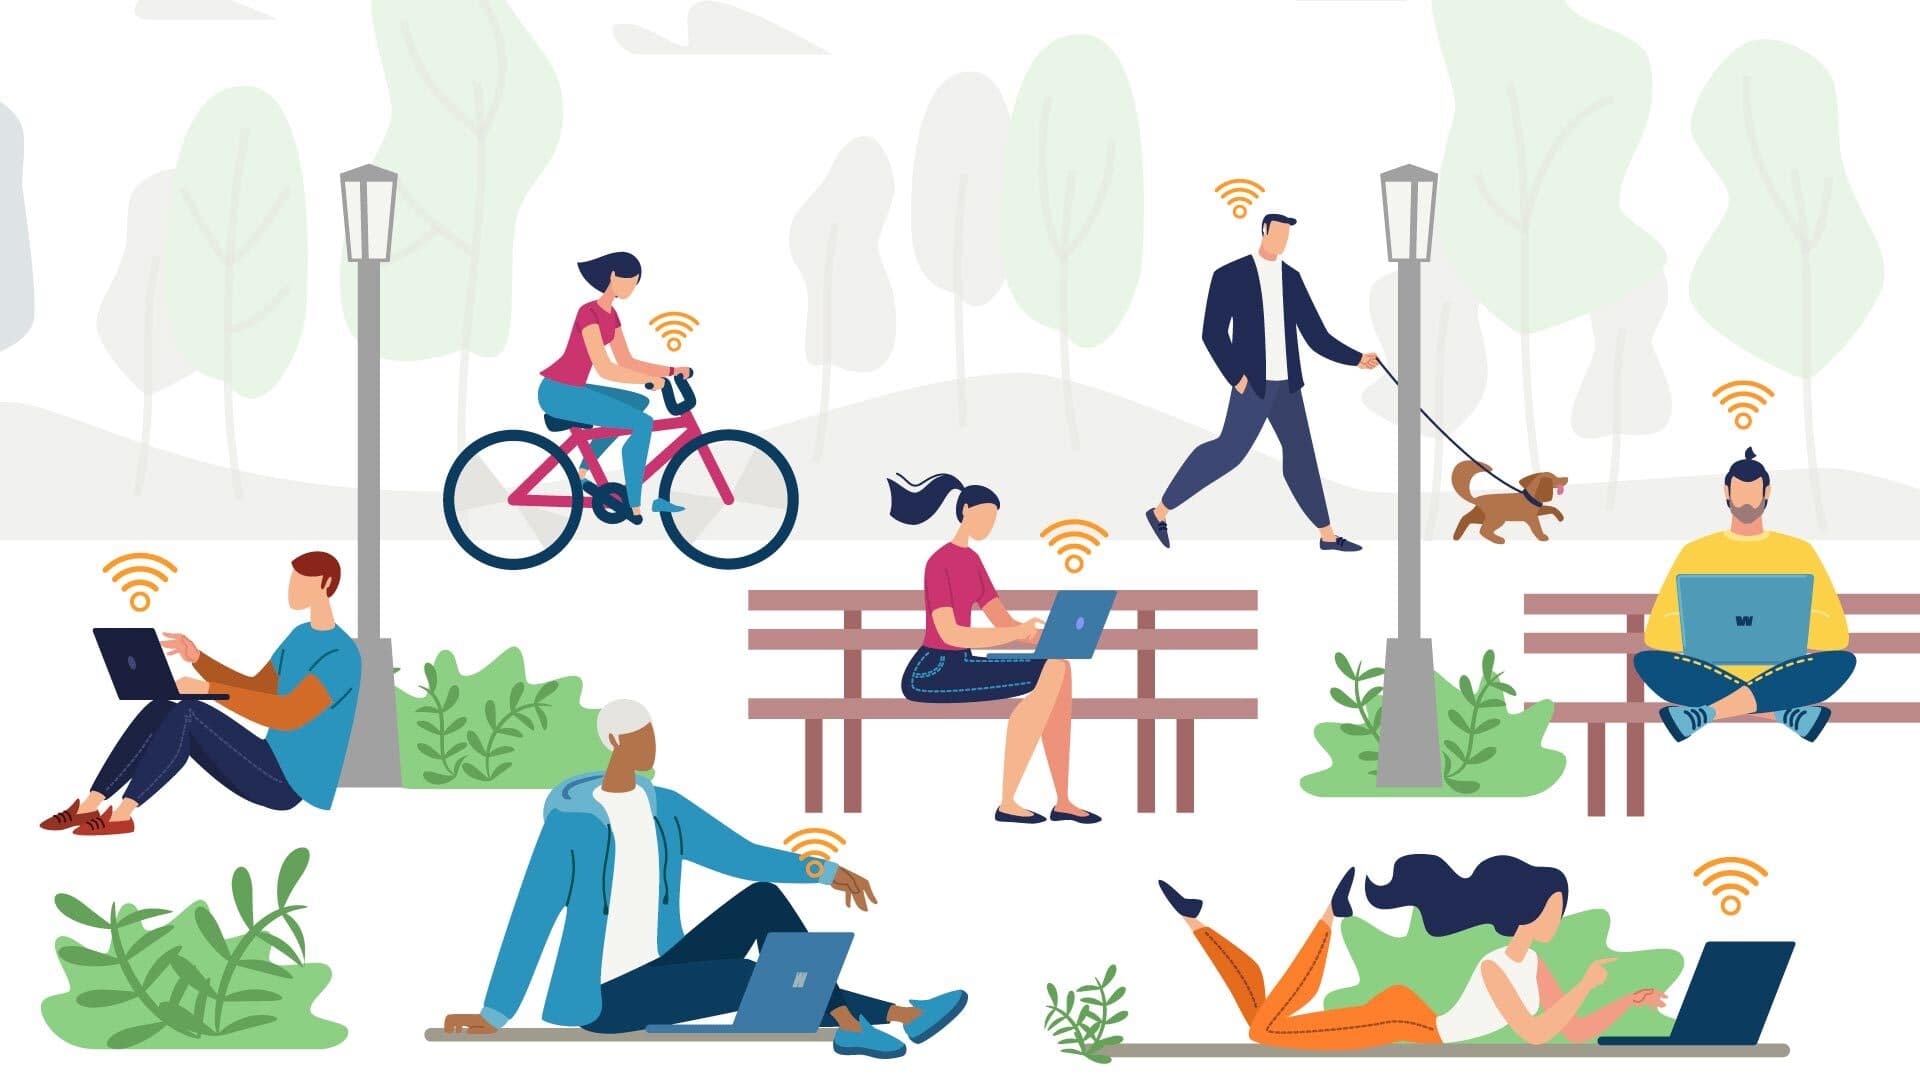 Illustration of people in a park connecting to WiFi